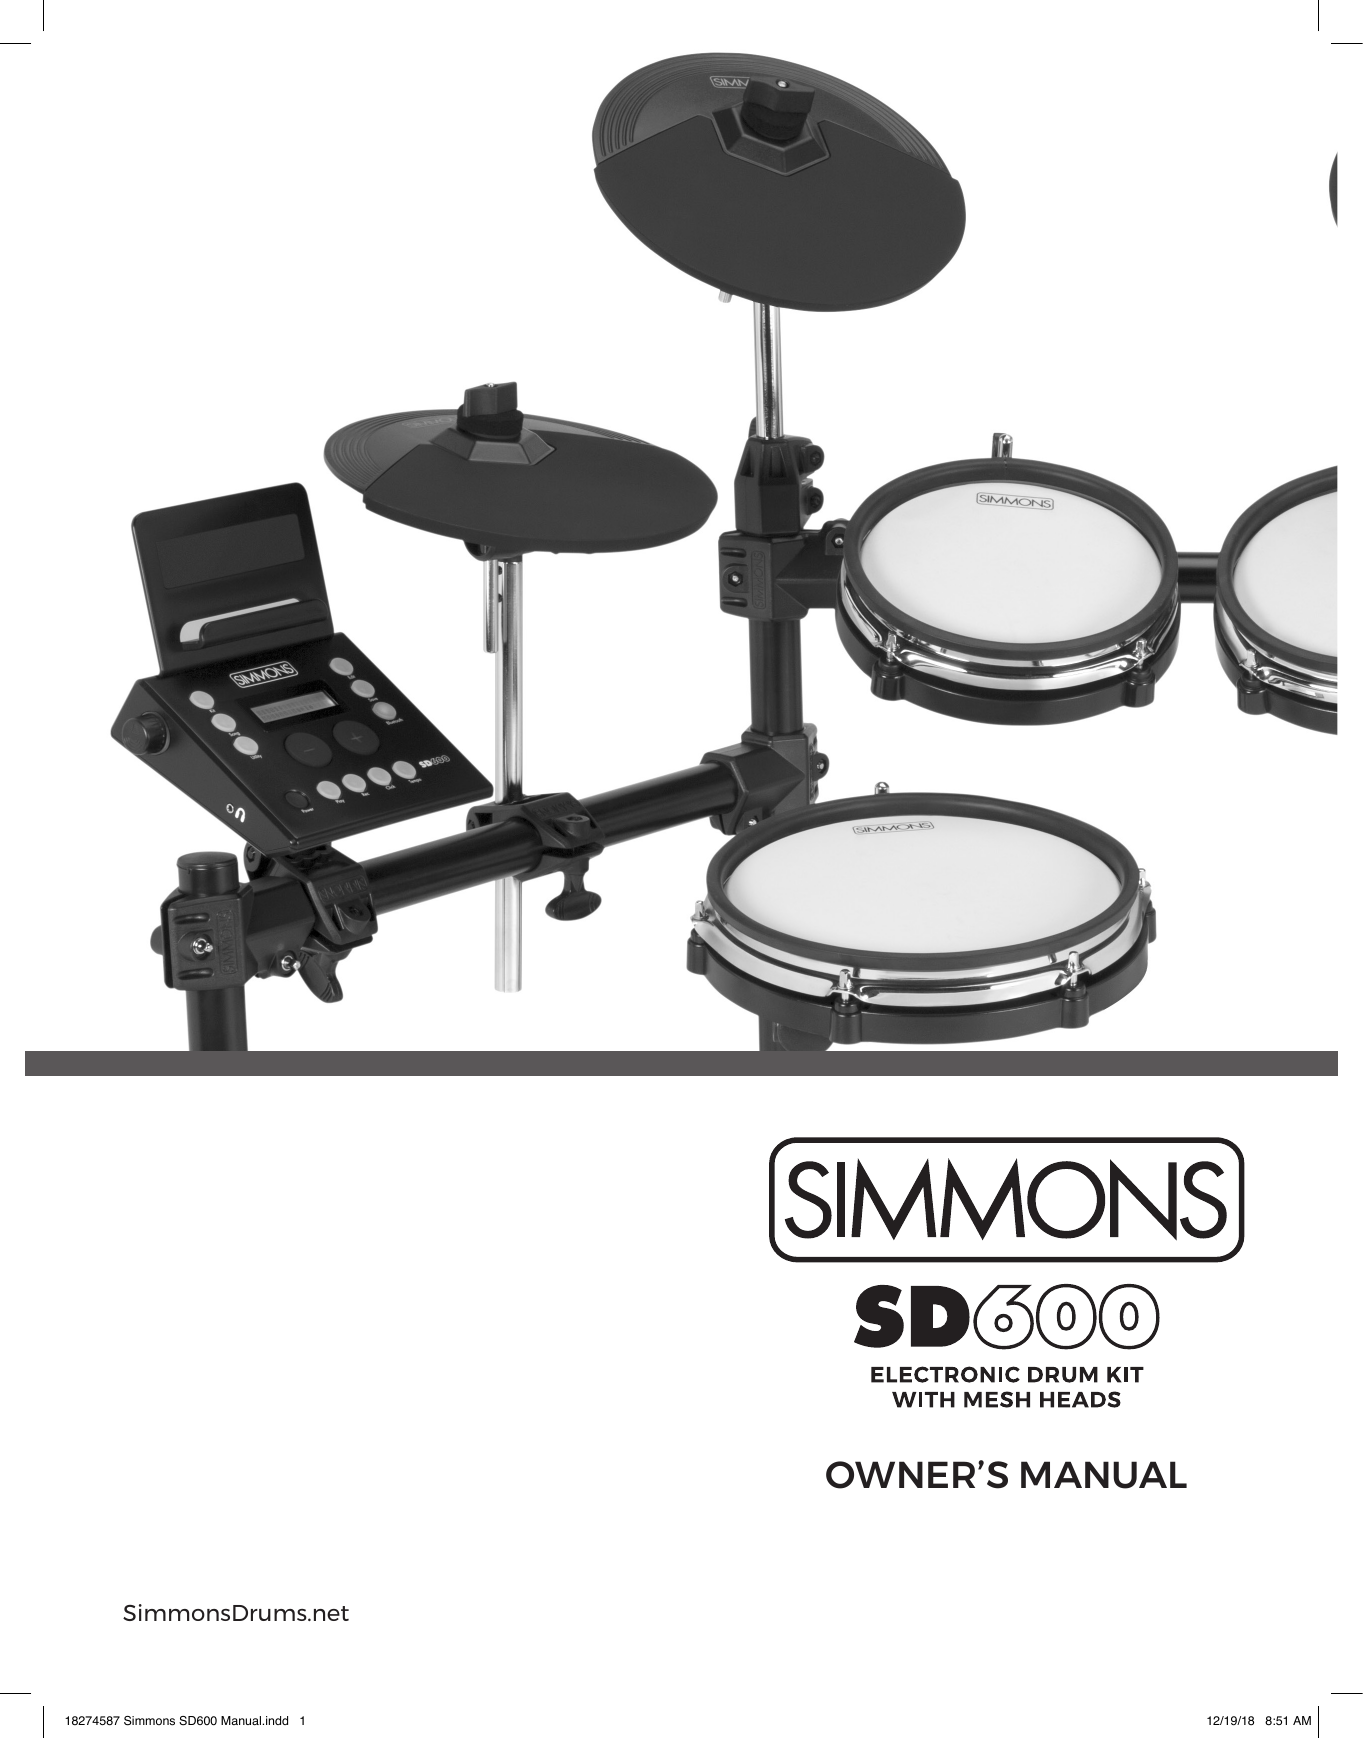 OWNER’S MANUALwww.simmonsdrums.netSimmonsDrums.netOWNER’S MANUAL18274587 Simmons SD600 Manual.indd   1 12/19/18   8:51 AM